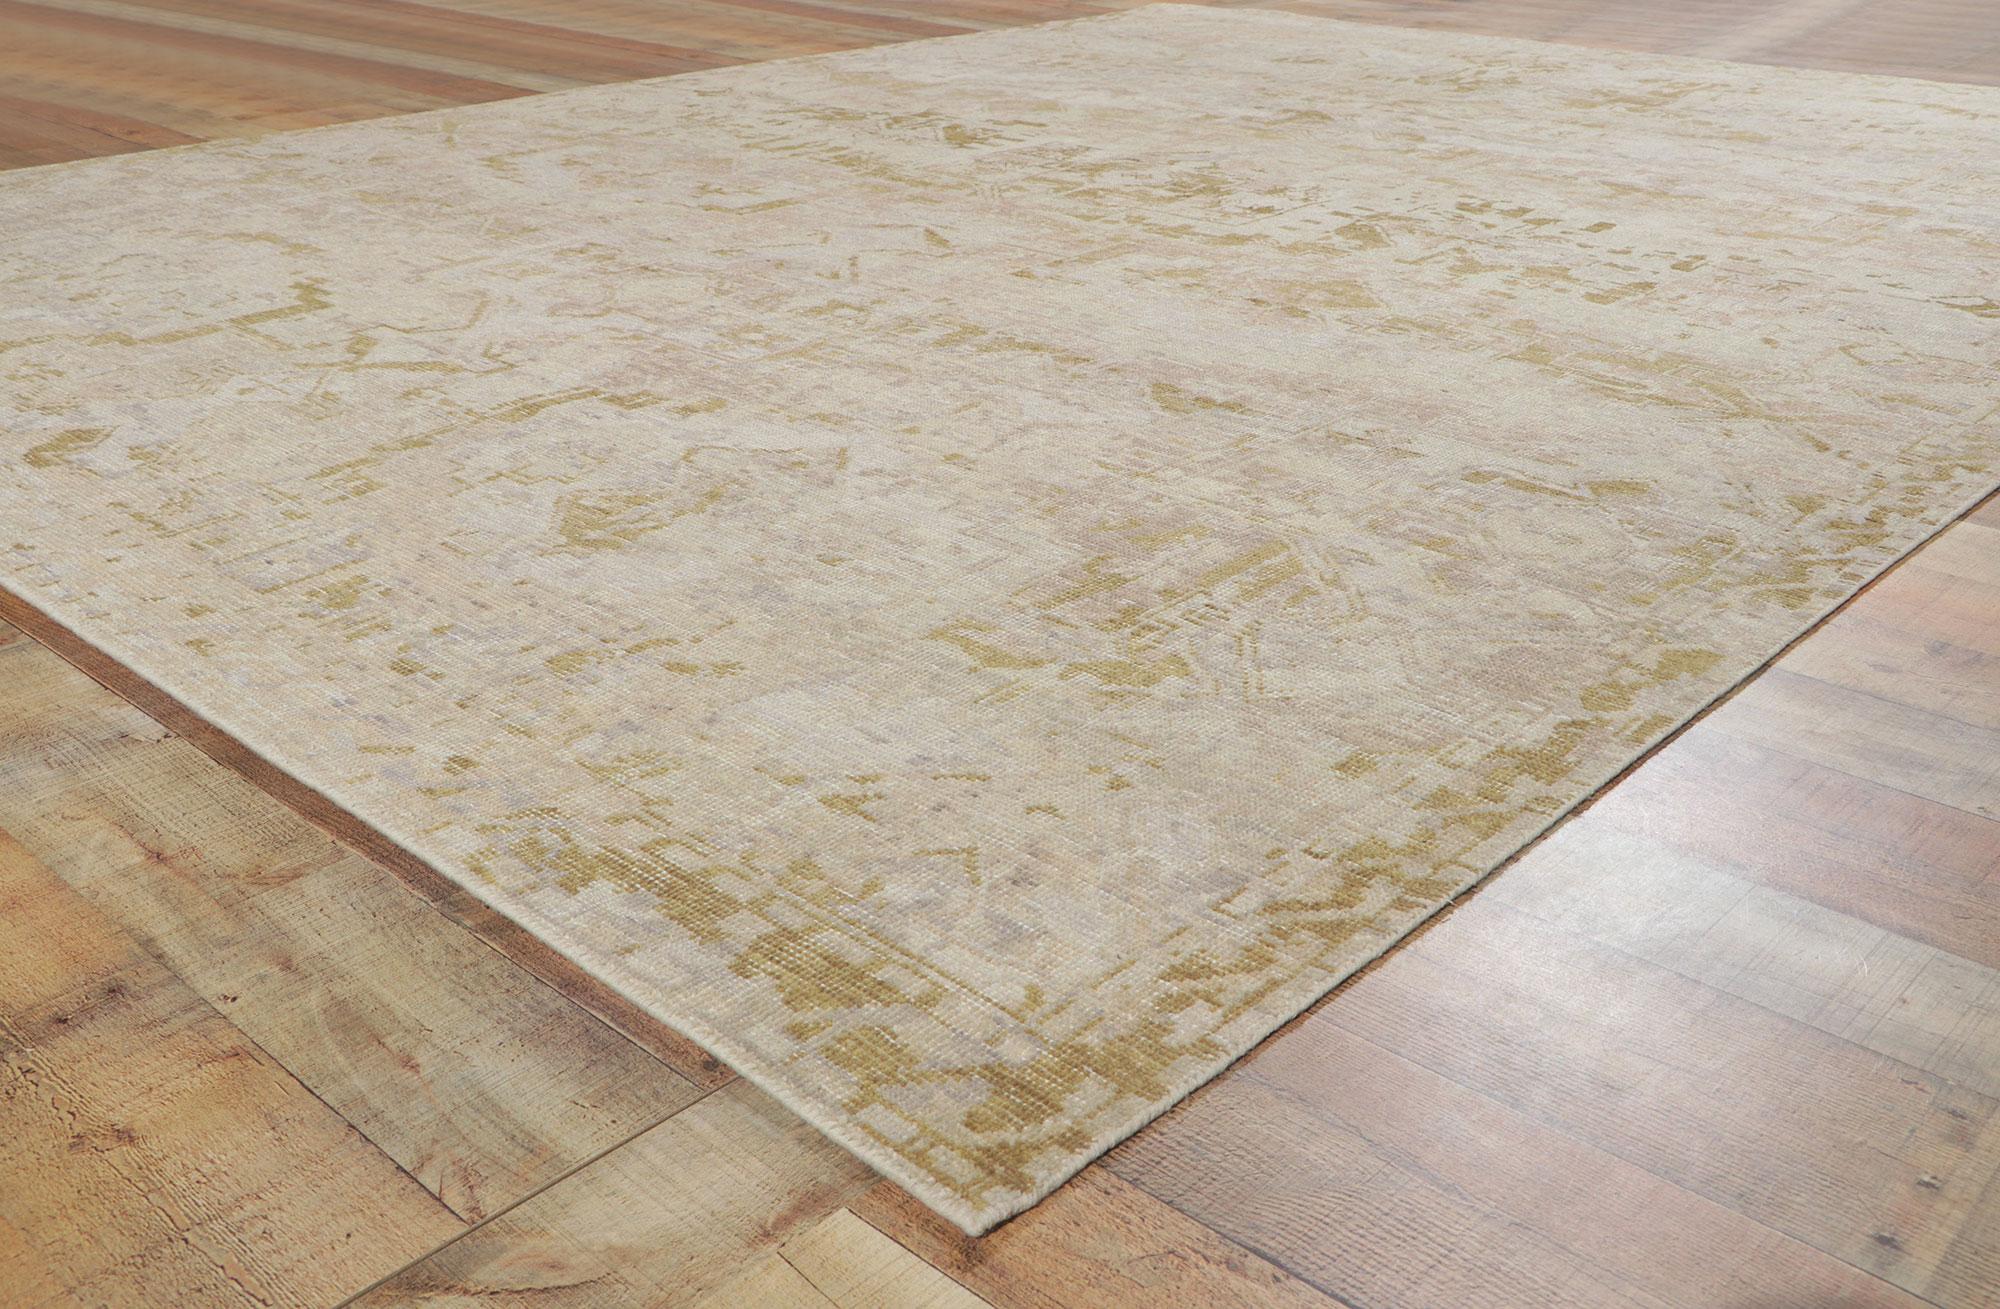 Indian New Vintage-Style Distressed Rug with Neutral Earth-Tone Colors For Sale